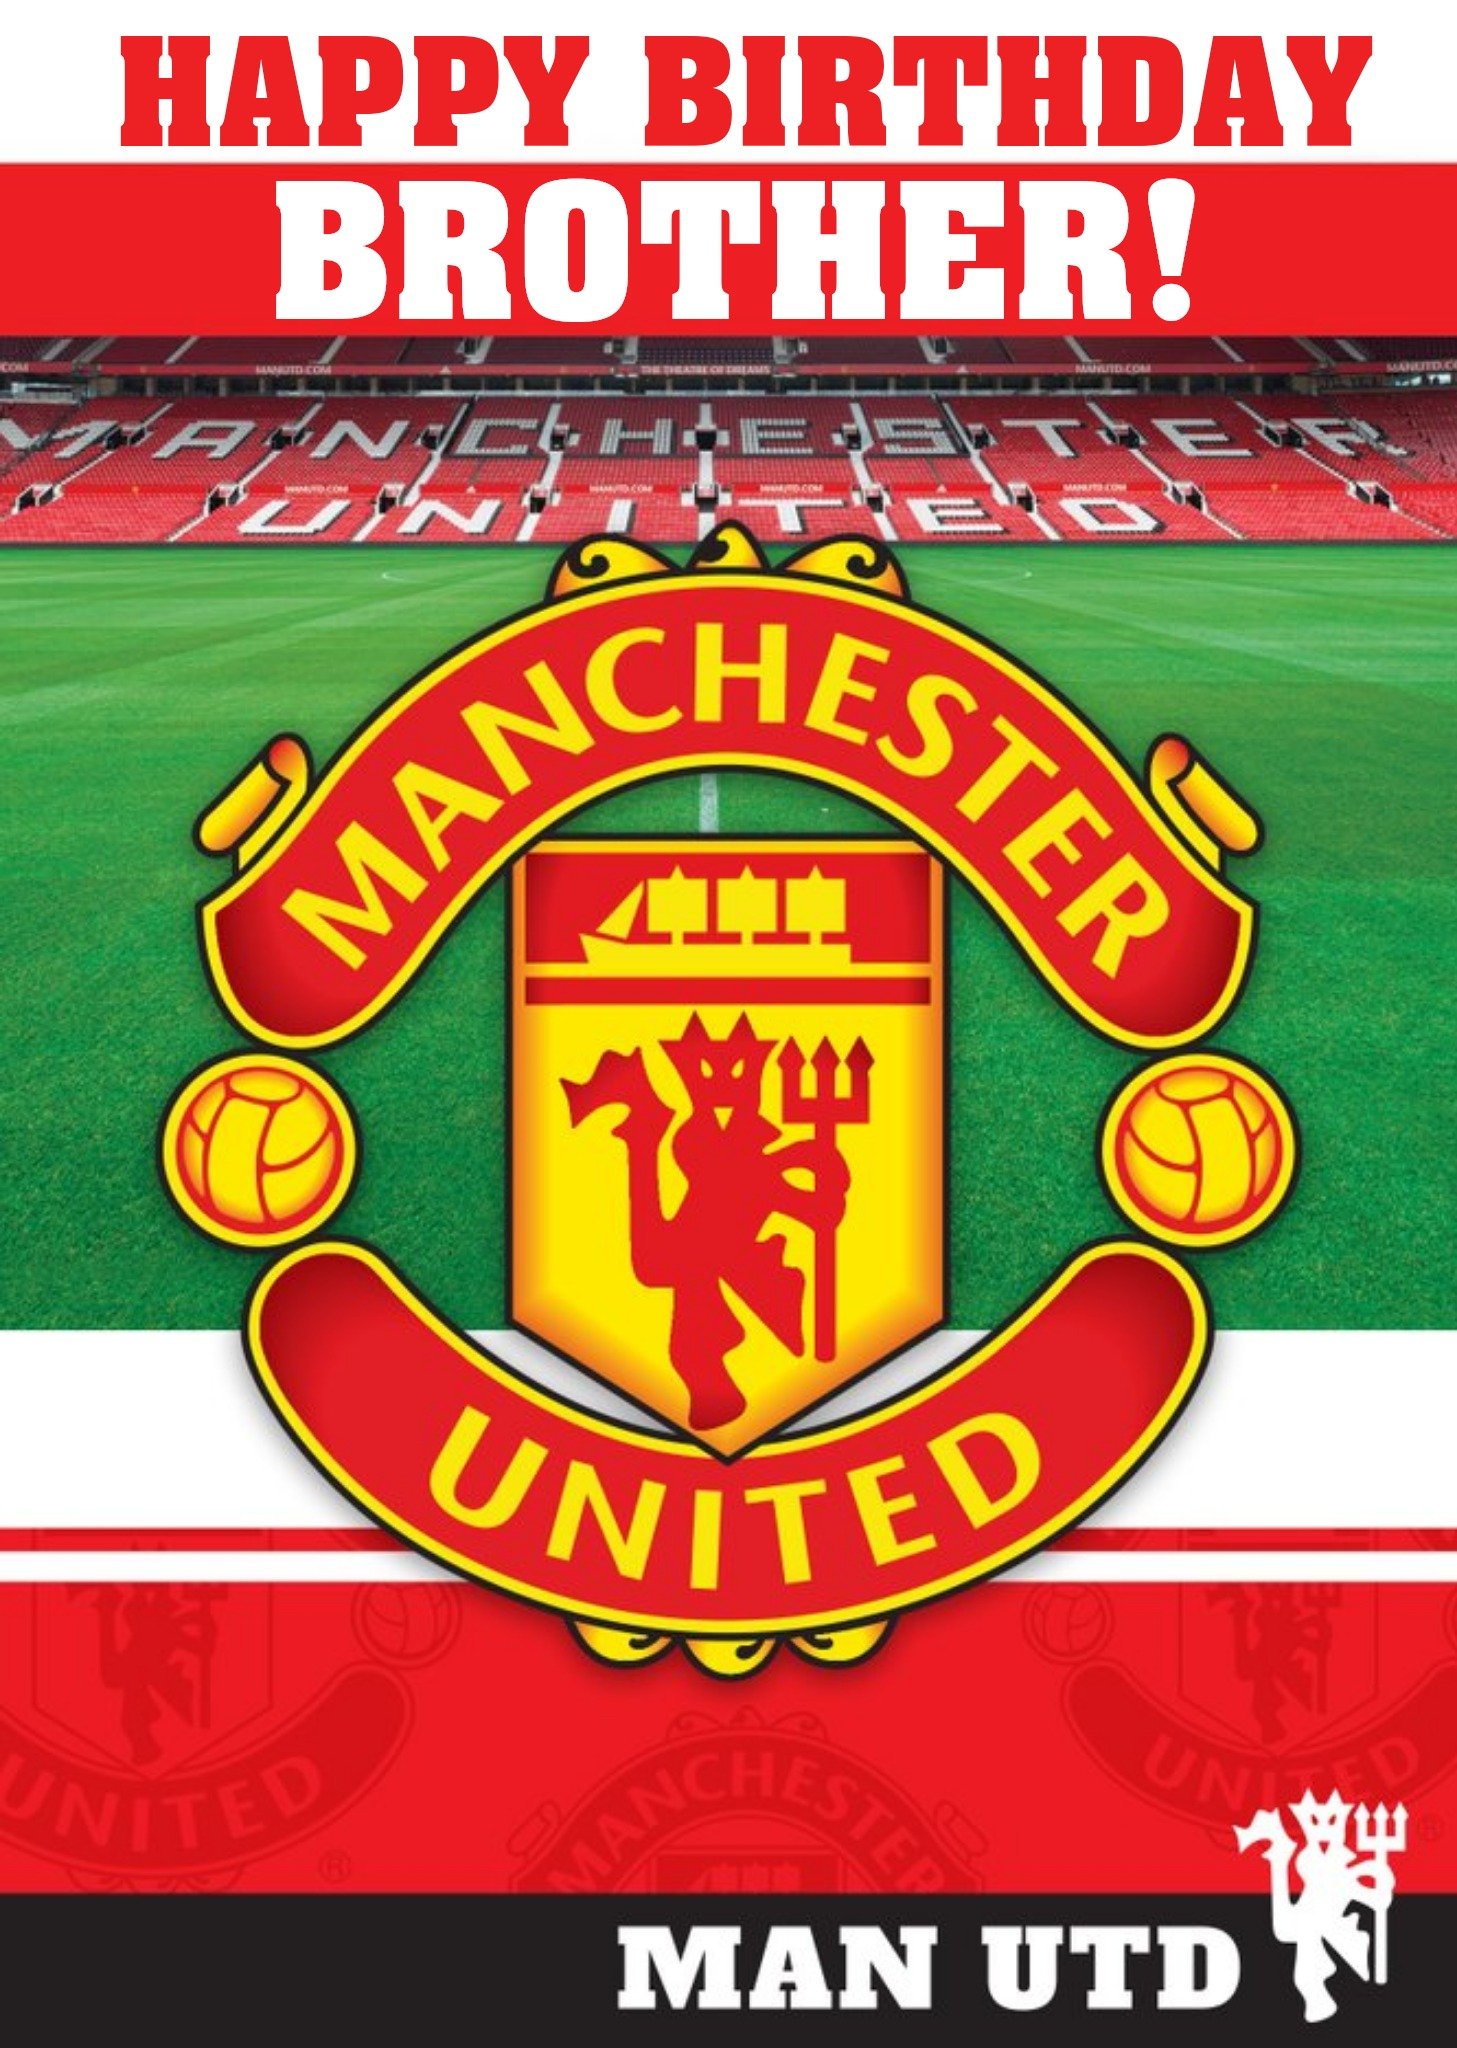 Manchester United Brother Happy Birthday Card Ecard